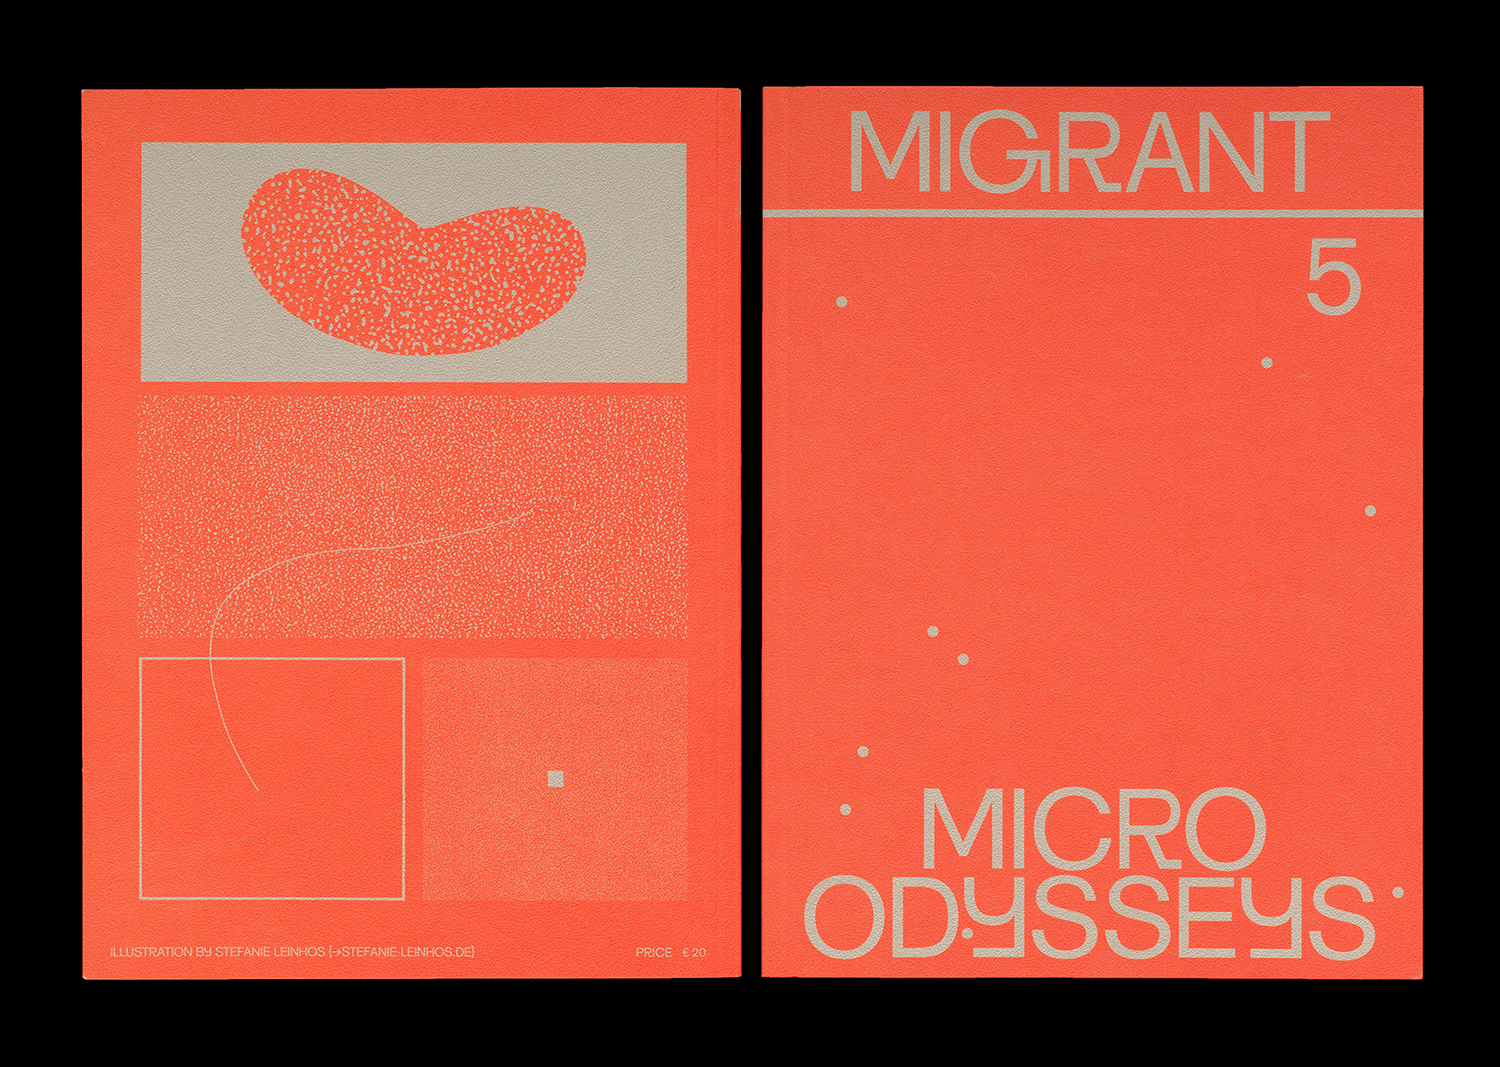 Migrant Journal No.5 Micro Odysseys edited by Justinien Tribillon, Michaela Büsse and Dámaso Randulfe, co-edited and designed by Offshore Studio